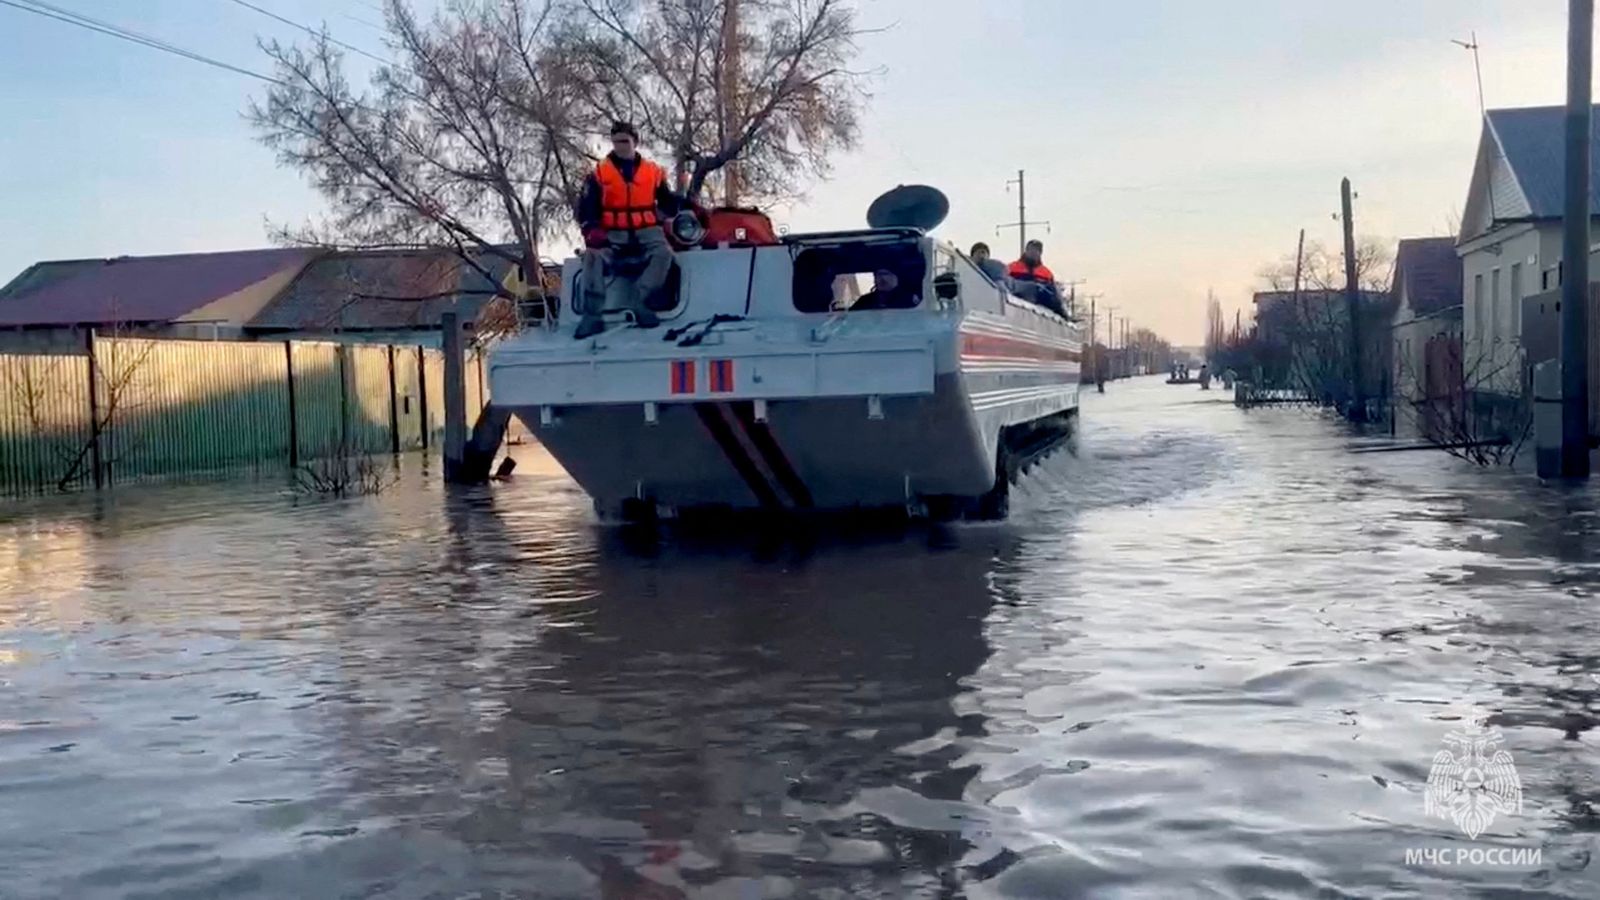 Russia floods: Thousands forced to flee homes after melting snow triggers record flooding